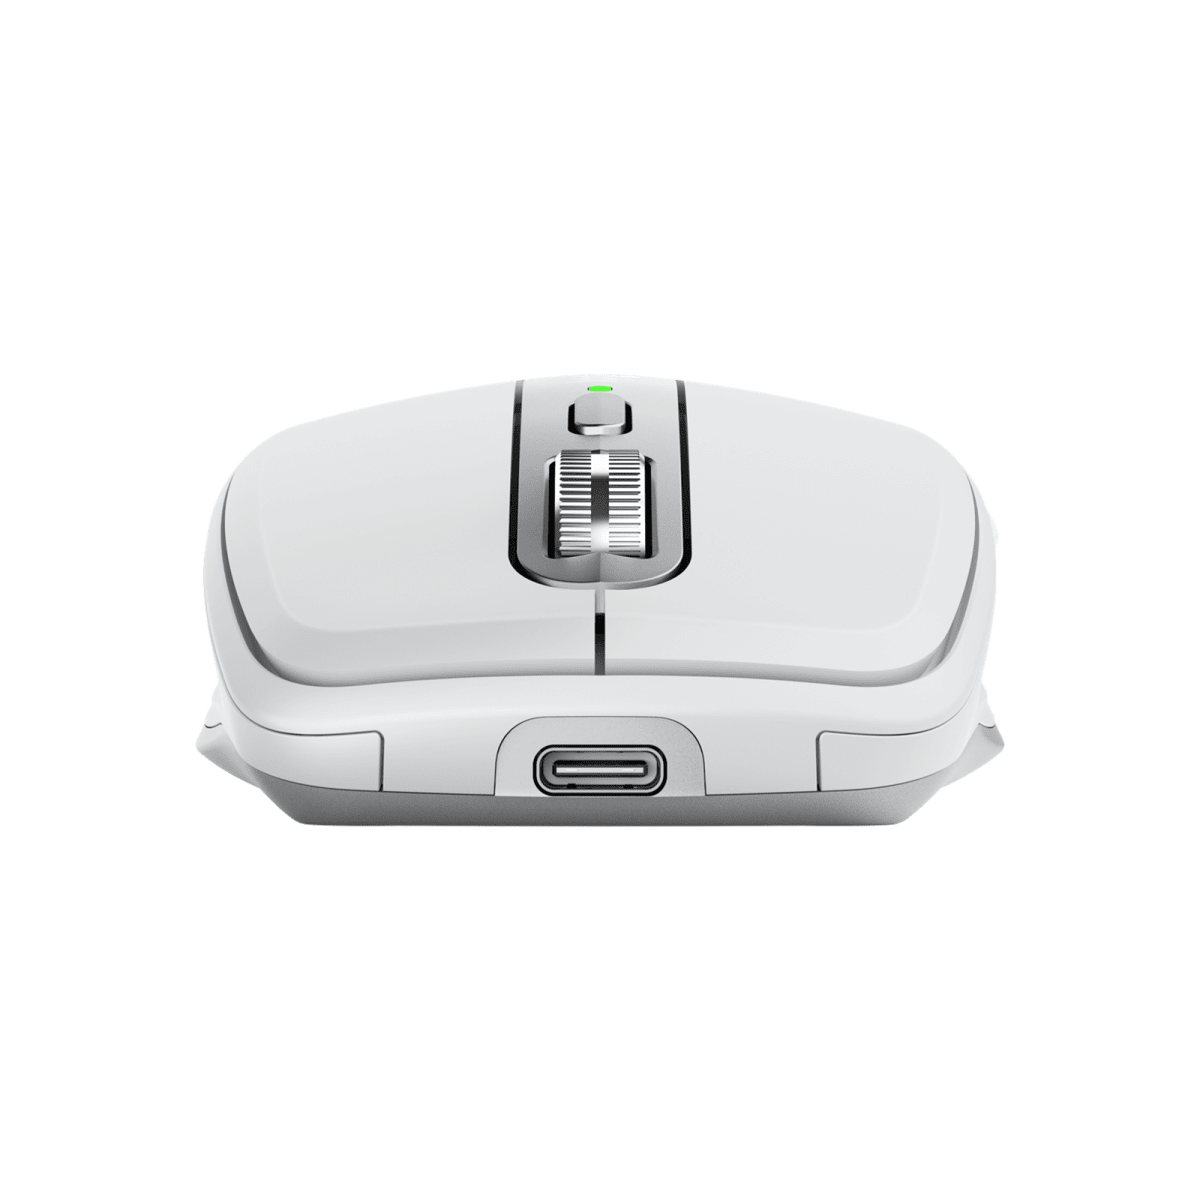 LOGITECH Anywhere Maus, for 3 Business Weiß